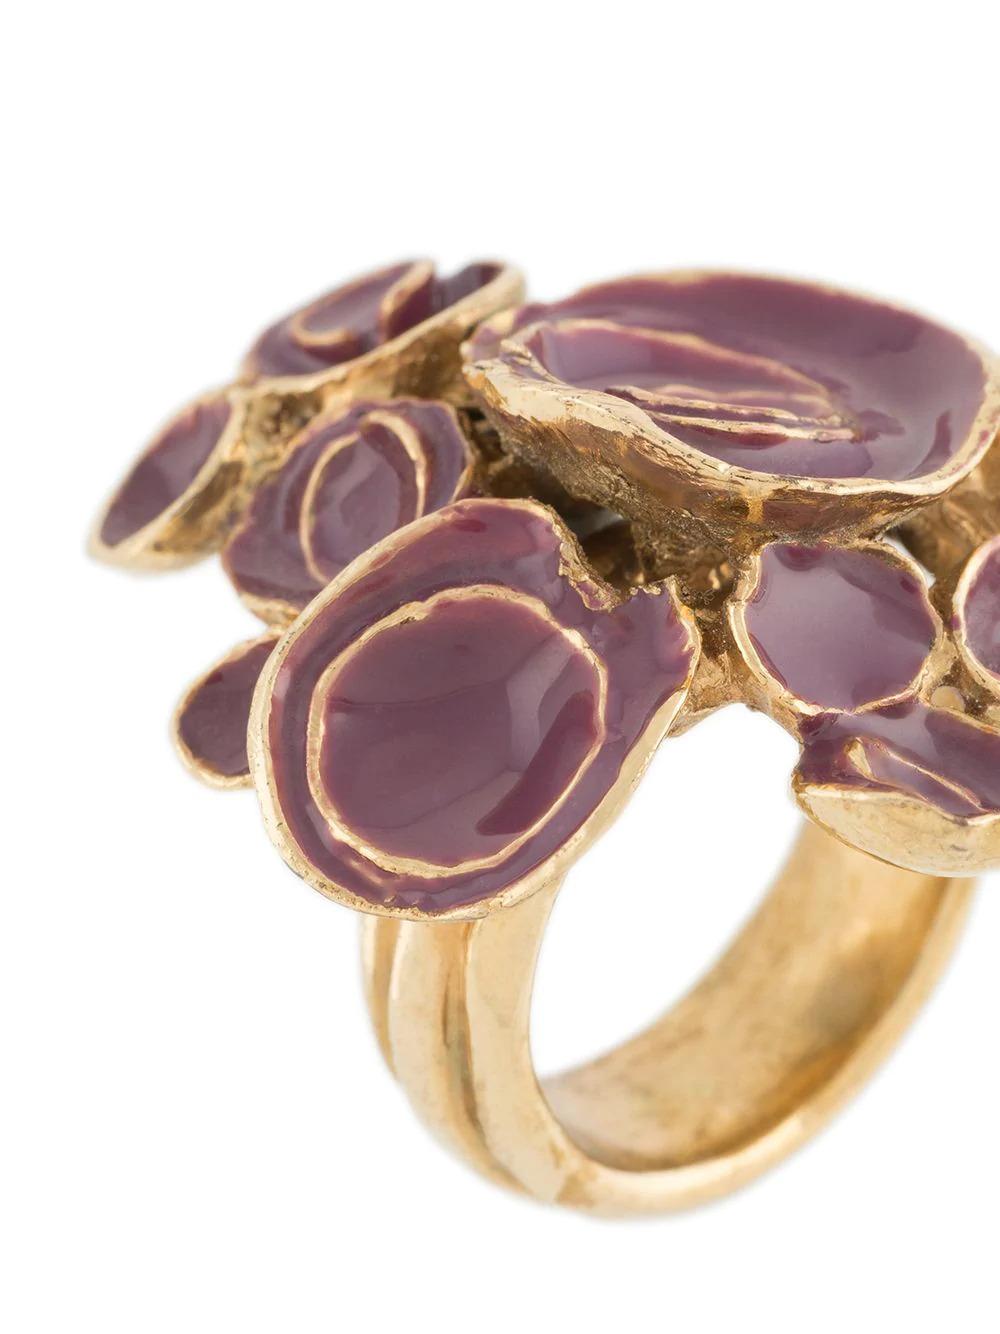 Mauve and gold ring from Yves Saint Laurent. Featuring an abstract design and crafted from gold plated metal. 	

Colour: Purple & Gold	

Composition: Gold plated metal	

Condition:  Very good vintage condition 8/10. Consistent with age, visible